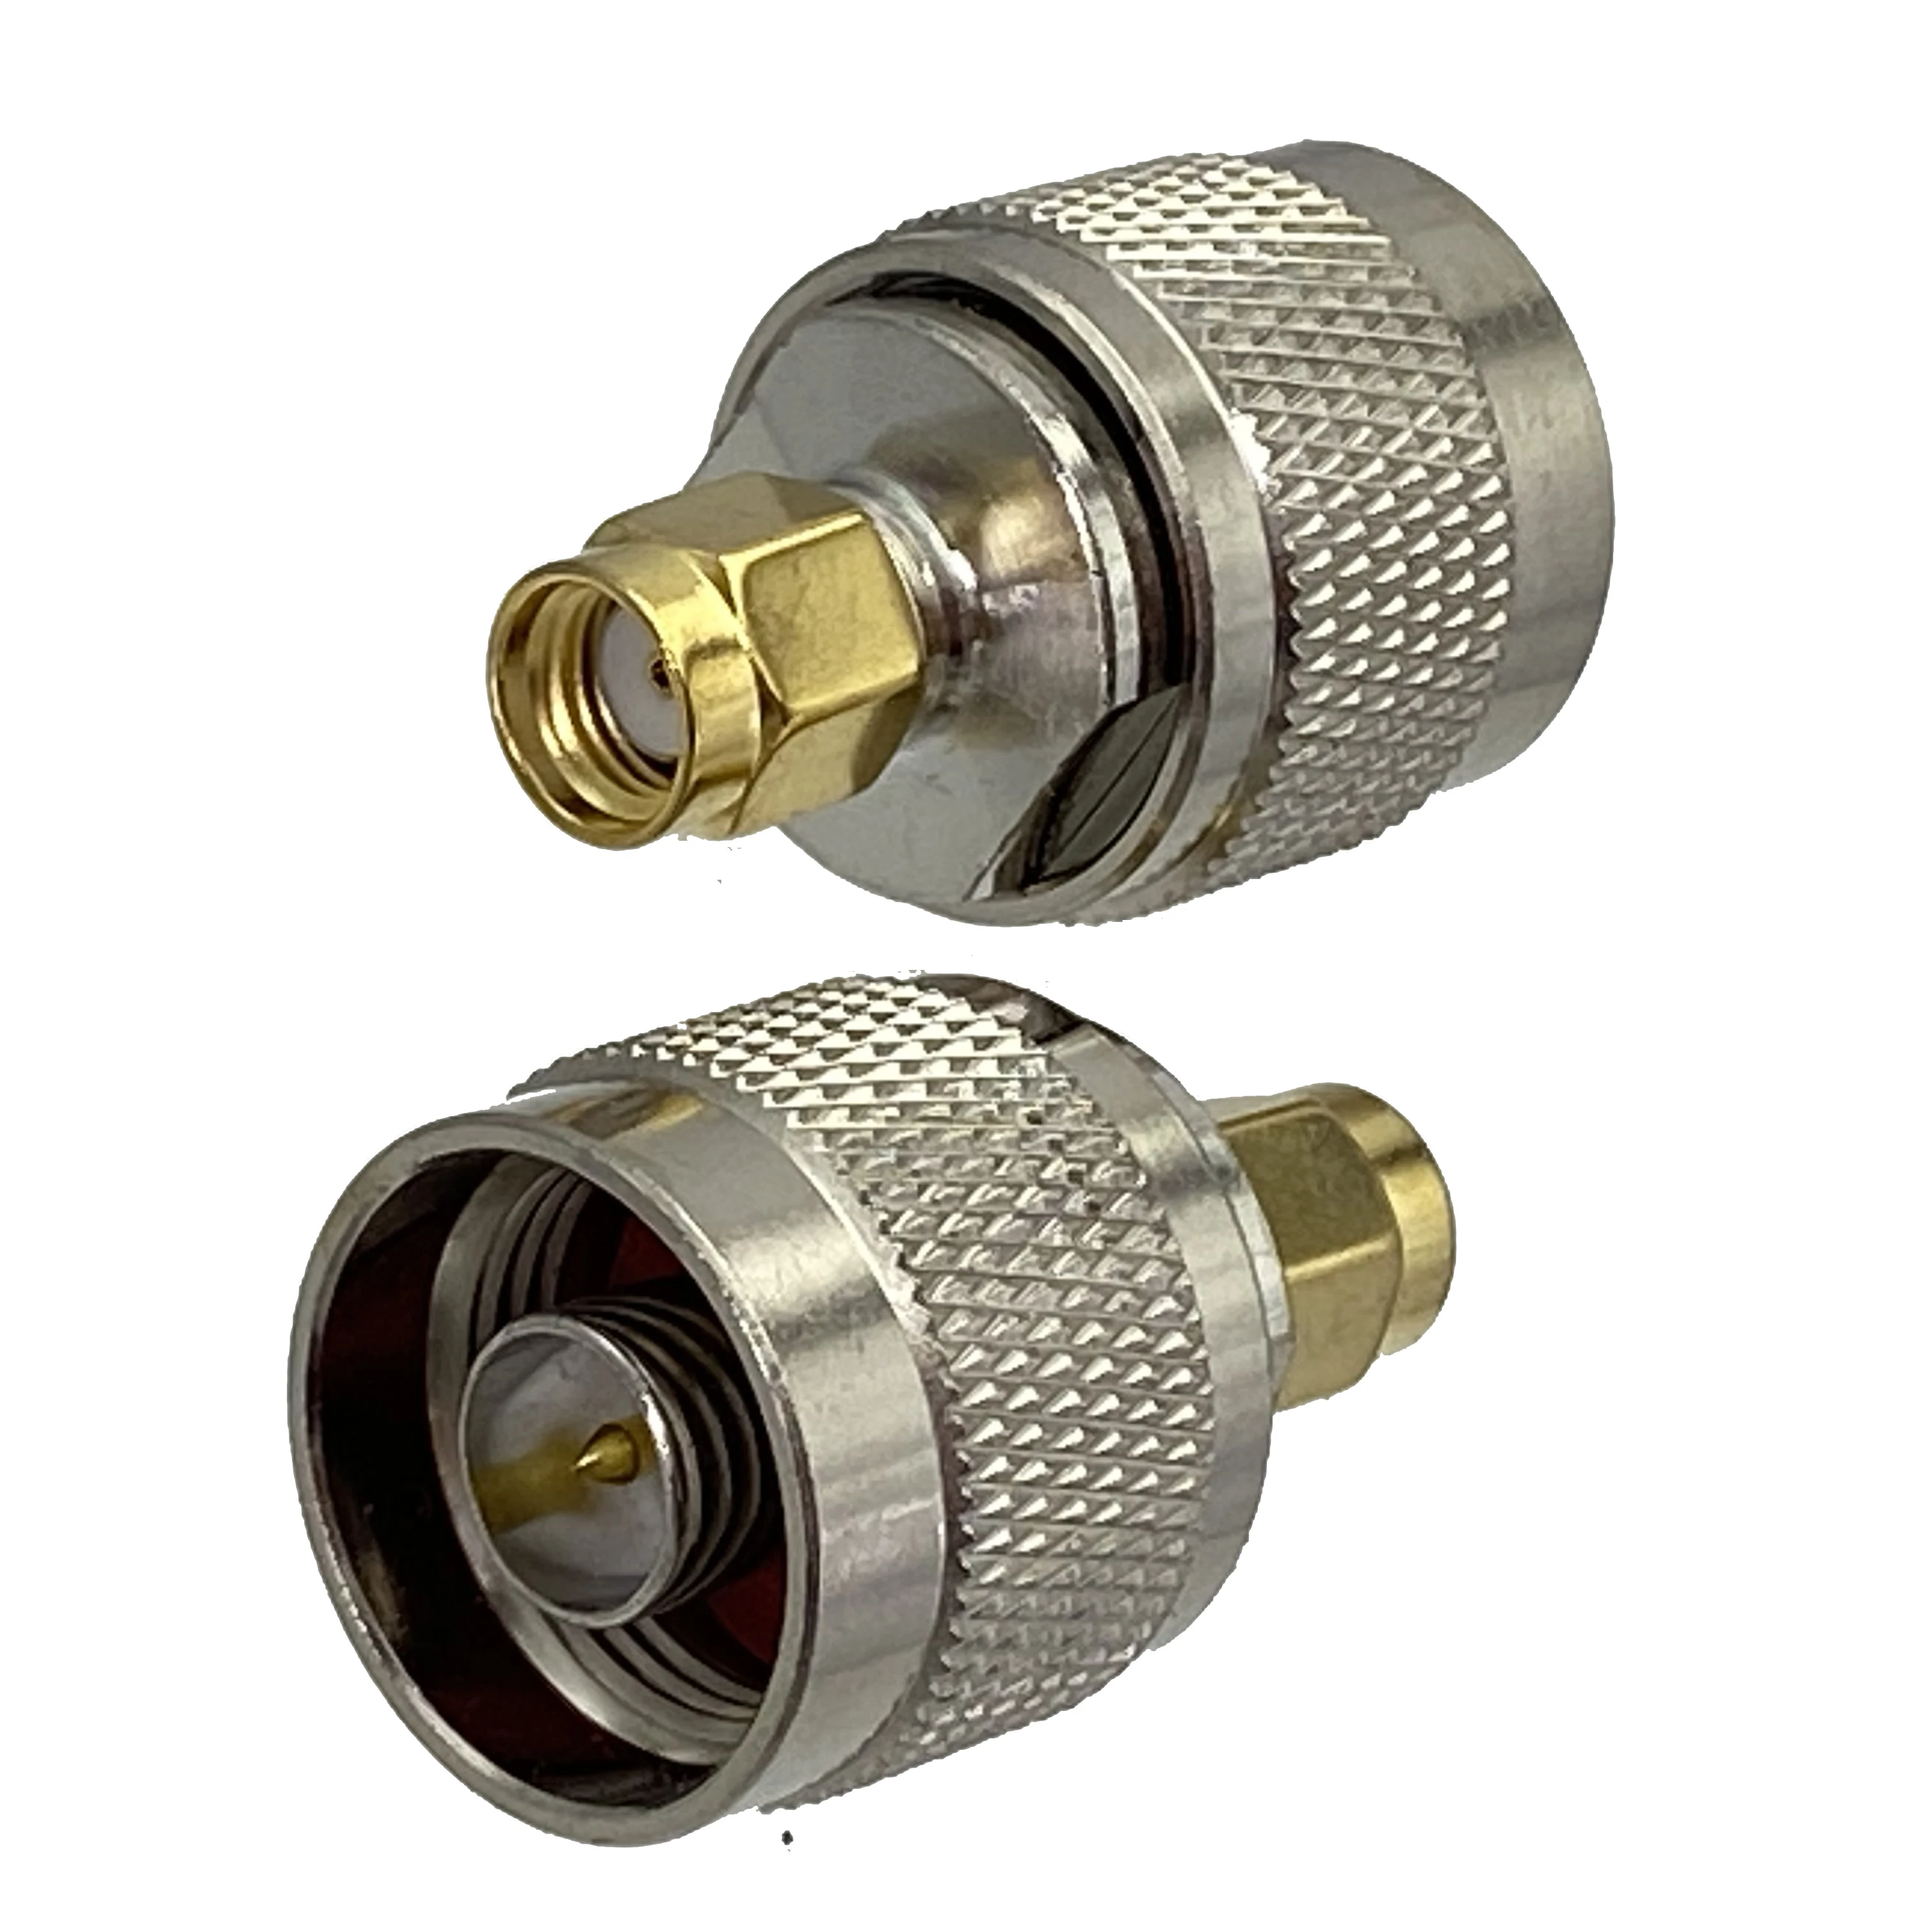 

1pcs Connector Adapter RP SMA Male Jack to N Male Plug Wire Terminal RF Coaxial Converter New